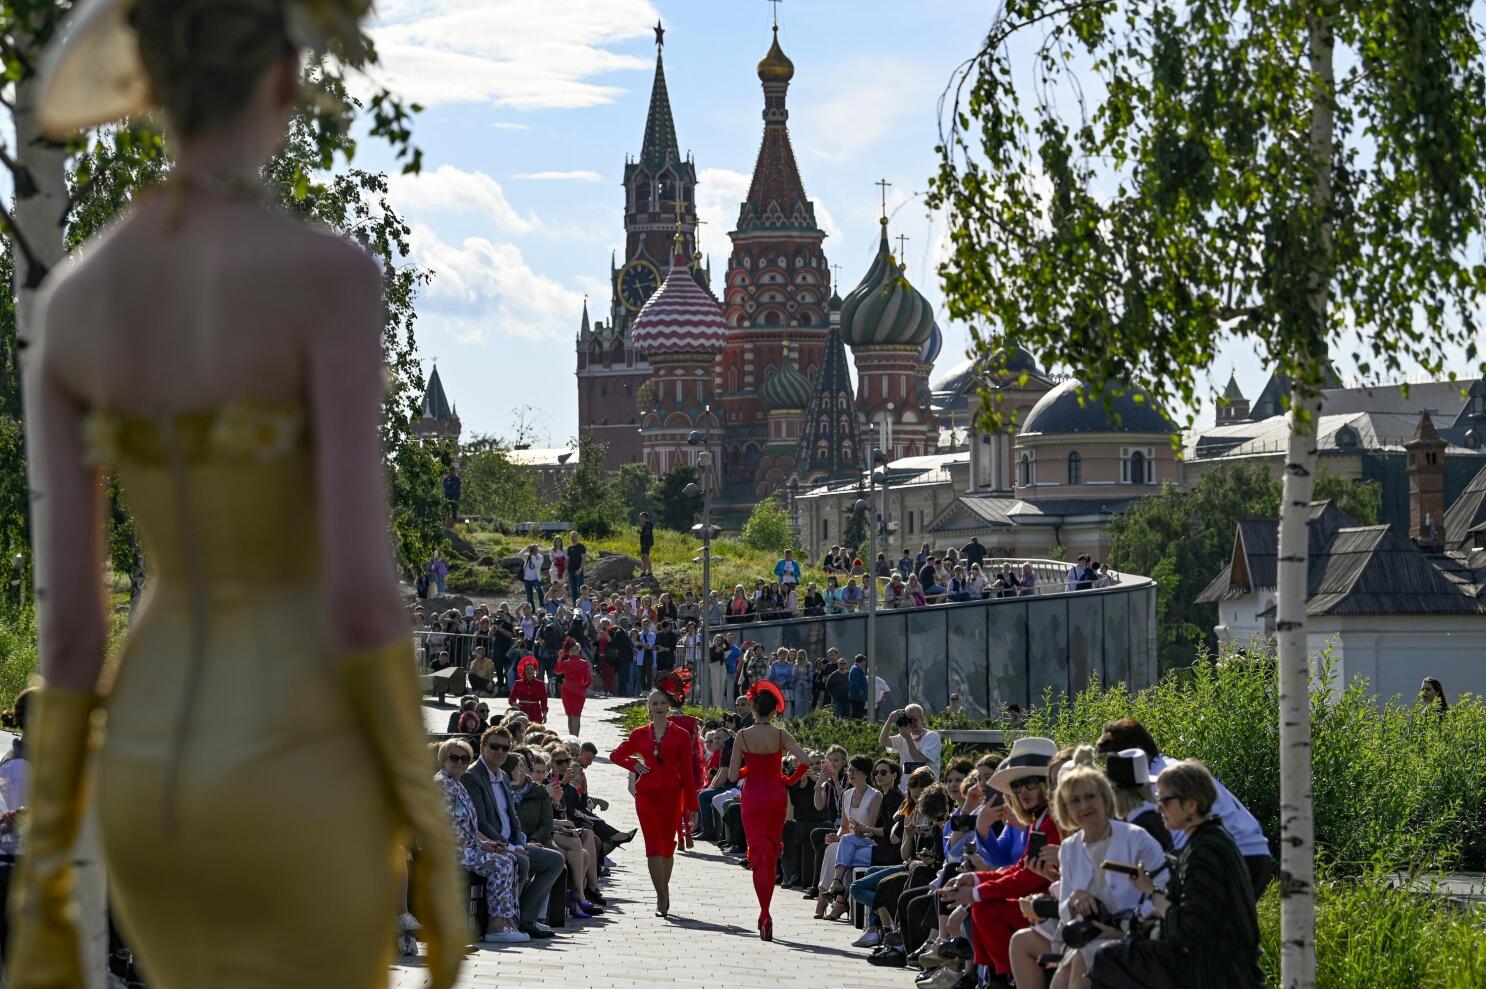 Global Luxury Spending Could Decline Due to the Ukraine War